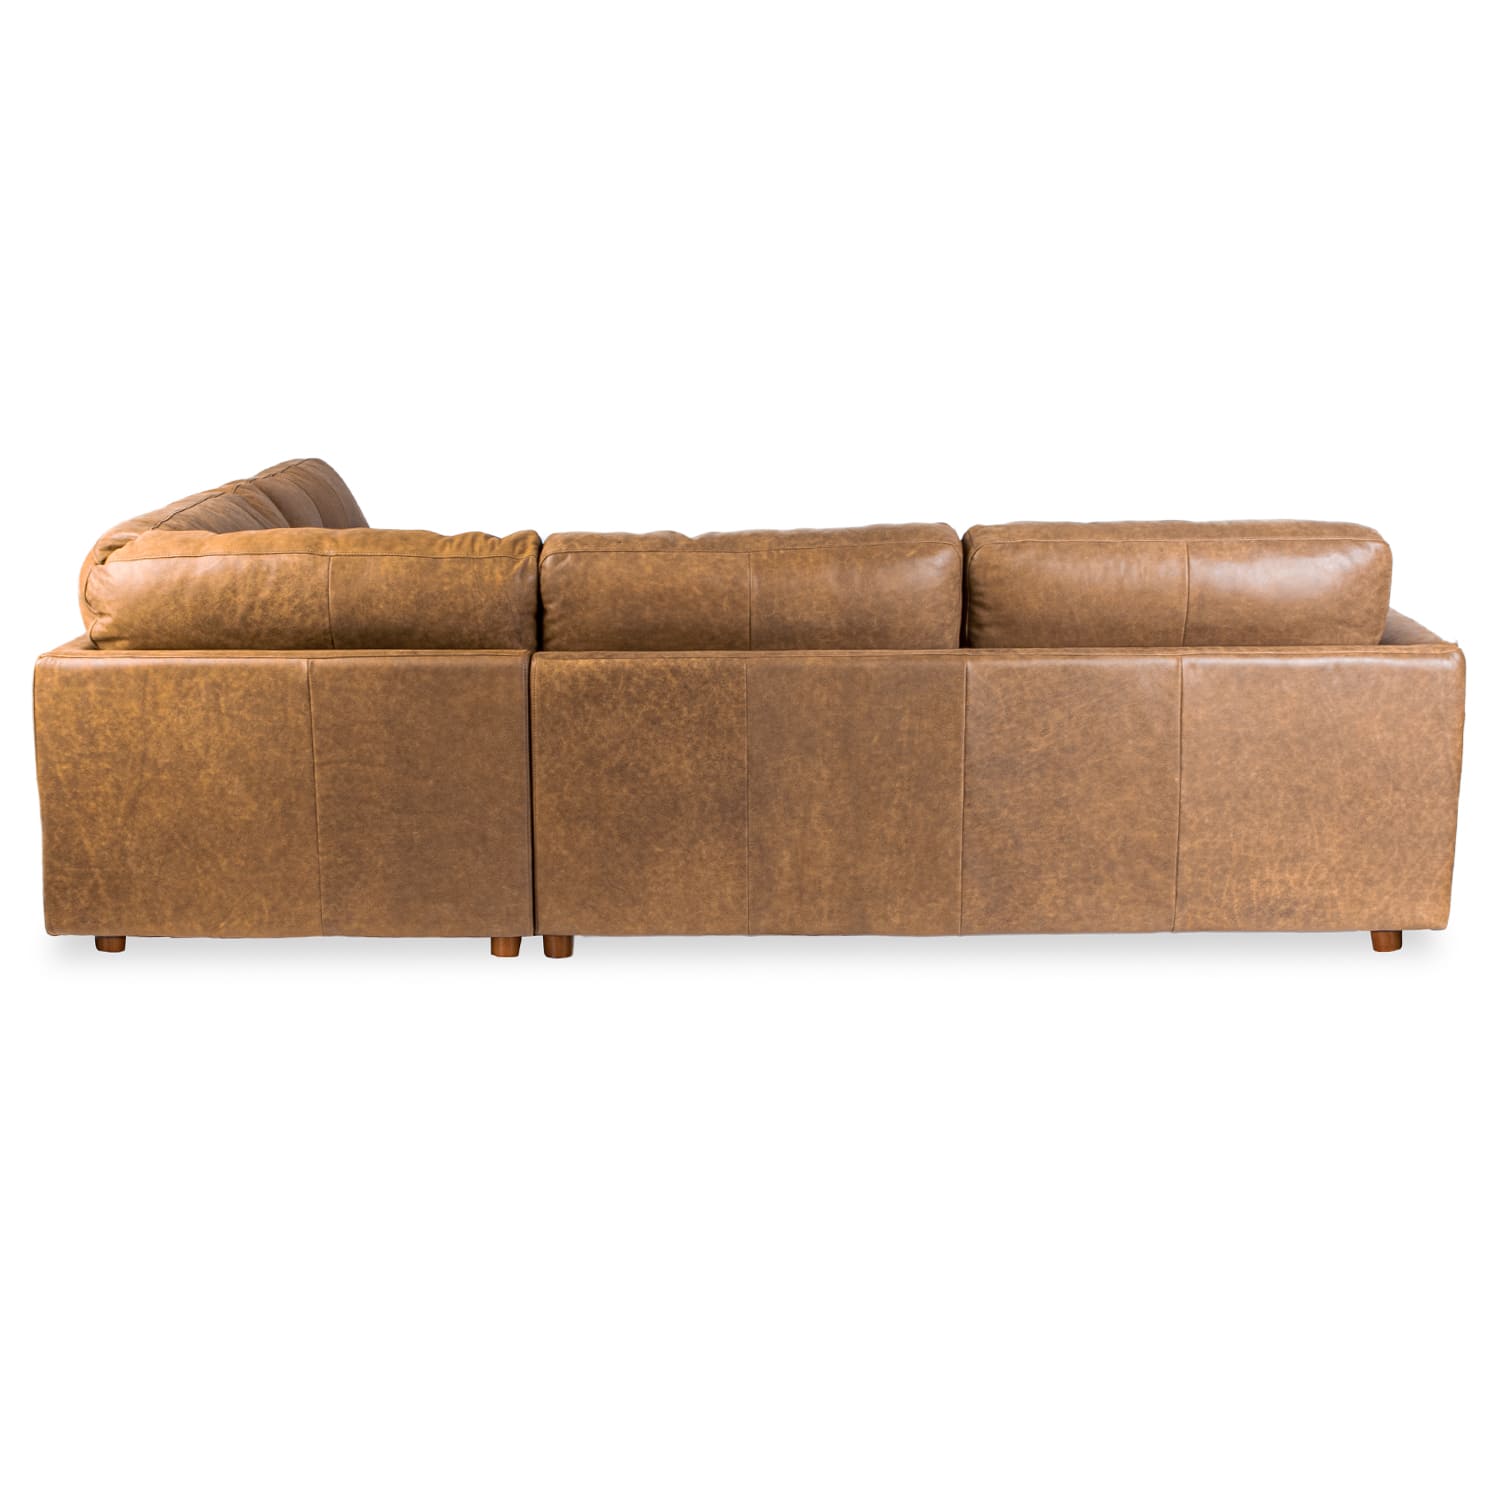 Harmony Leather Right Side Facing Chaise Lounge